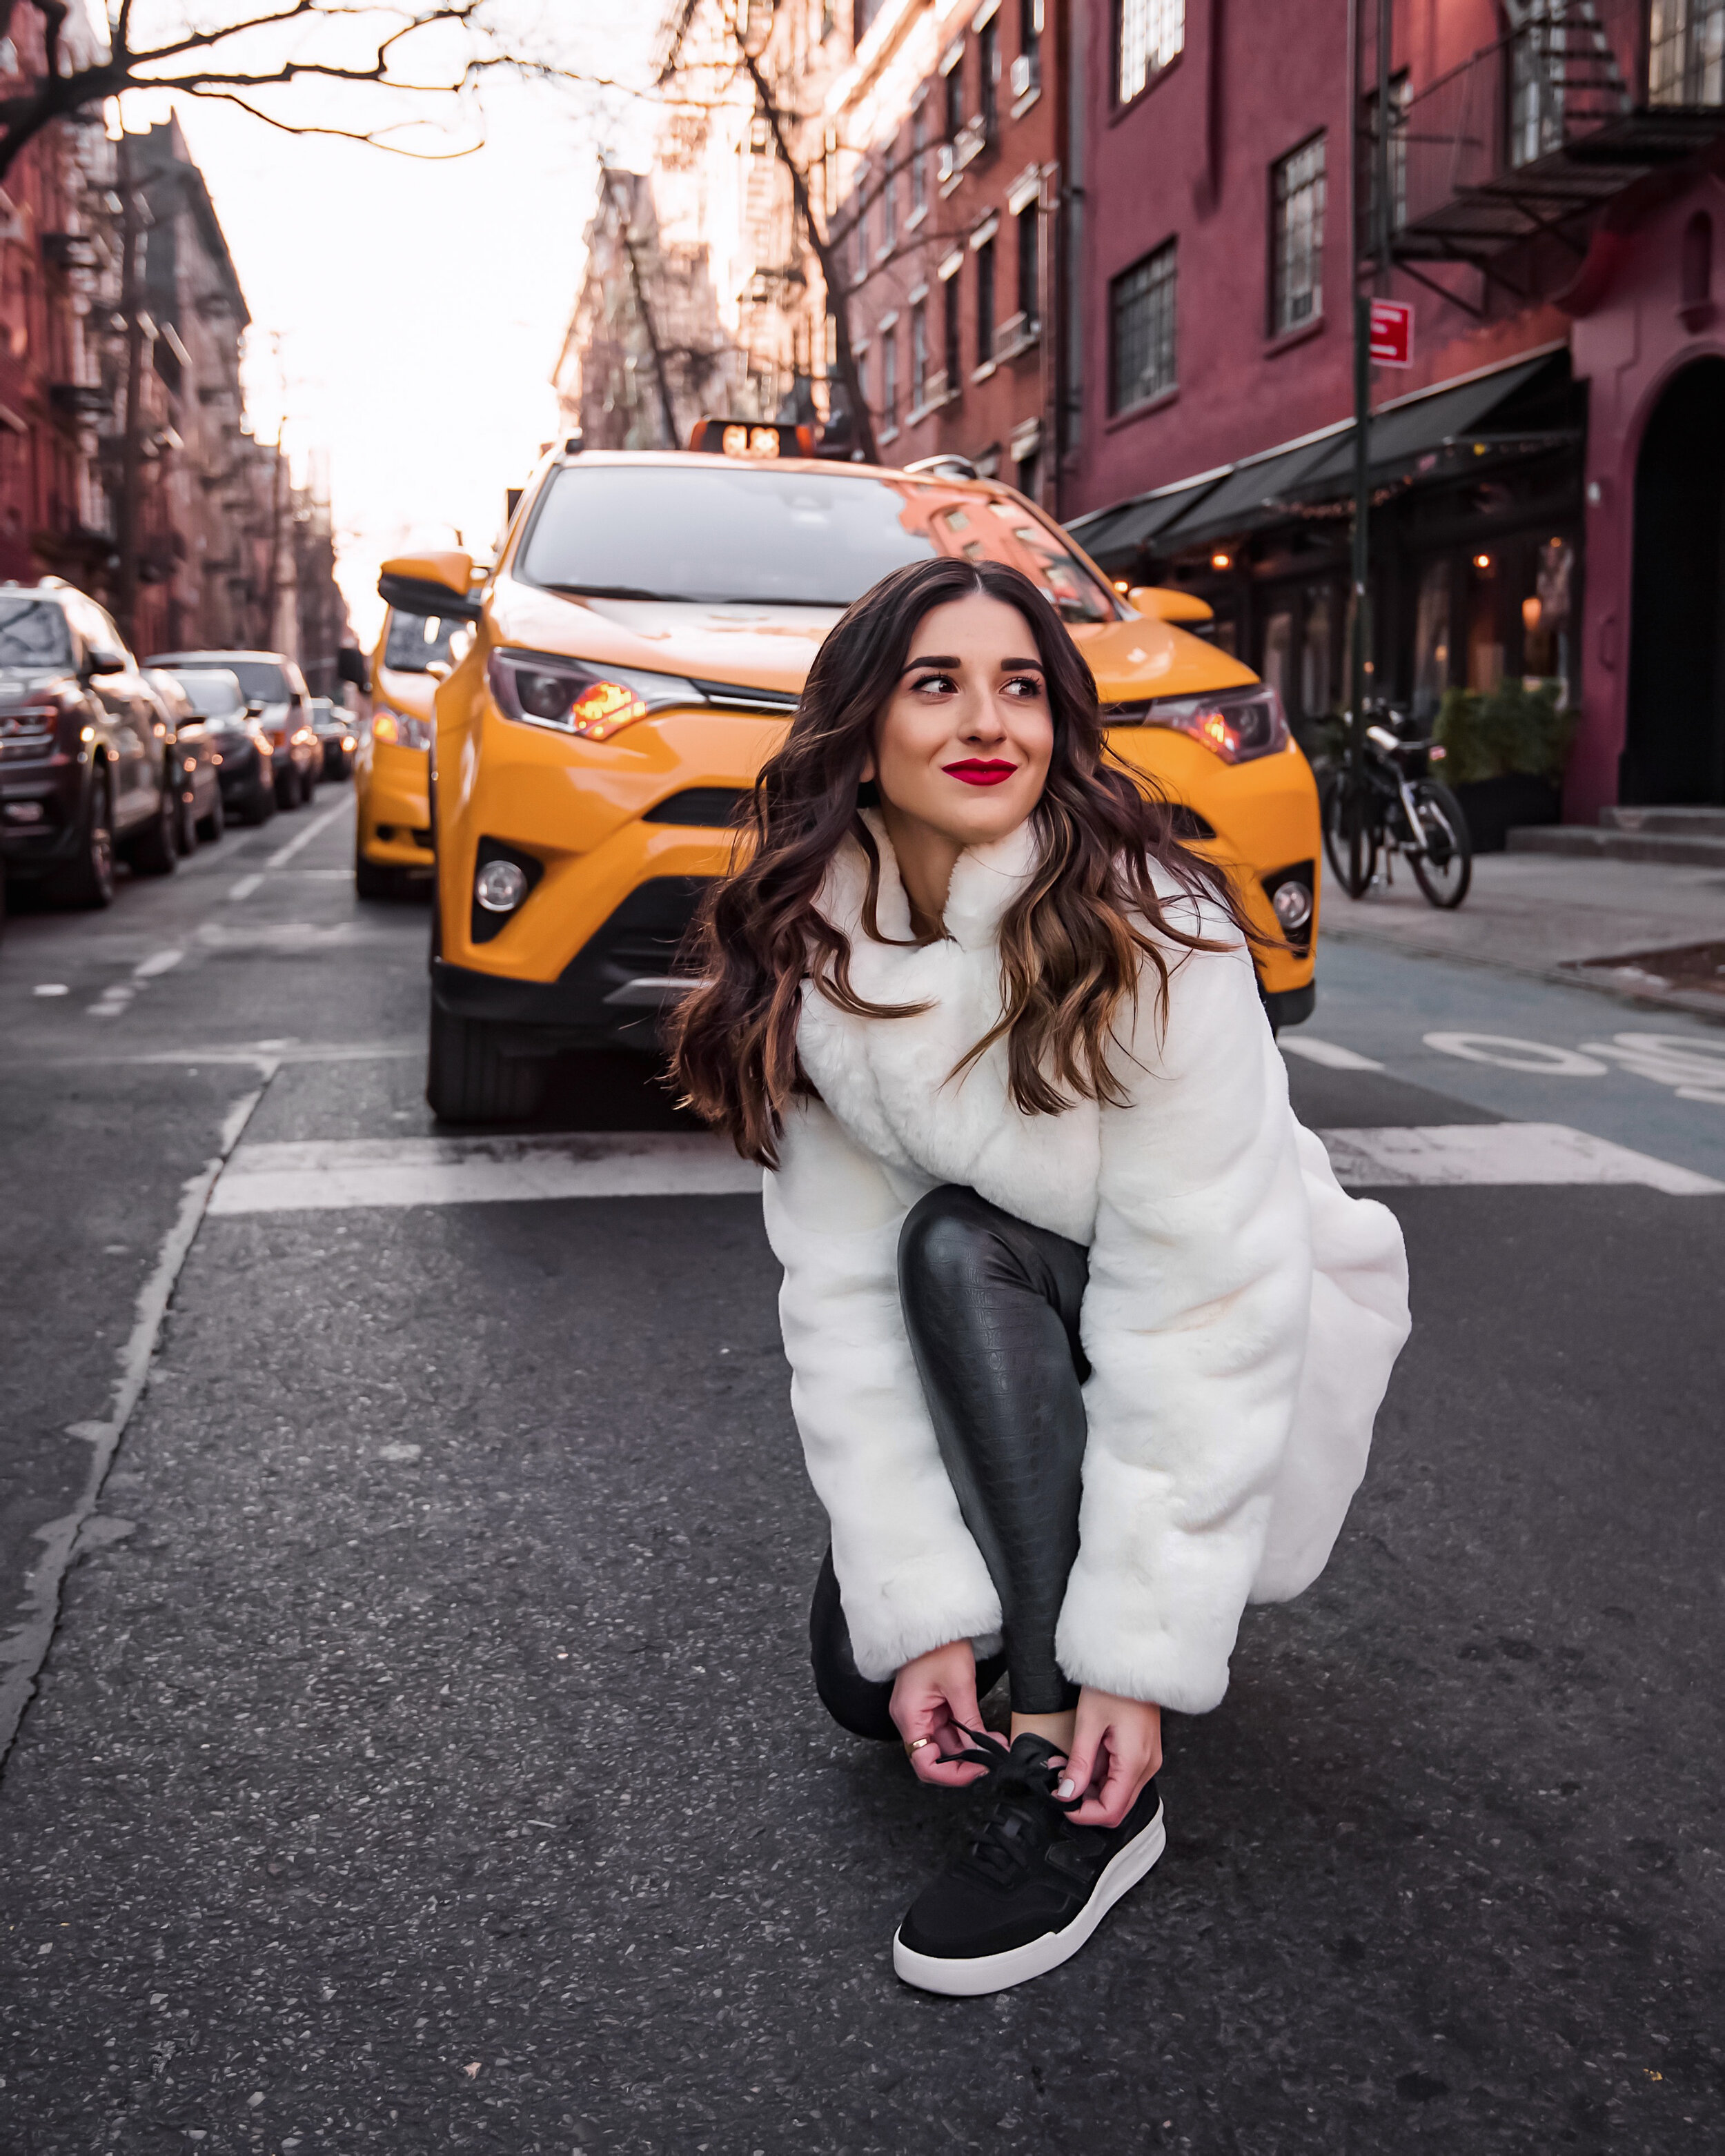 White Fur Coat Black  Snakeskin Leggings Esther Santer NYC Street Style Fashion Blog Winter Outfit OOTD Faux Fur Commando Nordstrom Maman Coffee Happy Girl Women Shopping Buy Red Lipstick Taxi Photography Manhattan Comfortable West Village Location.JPG